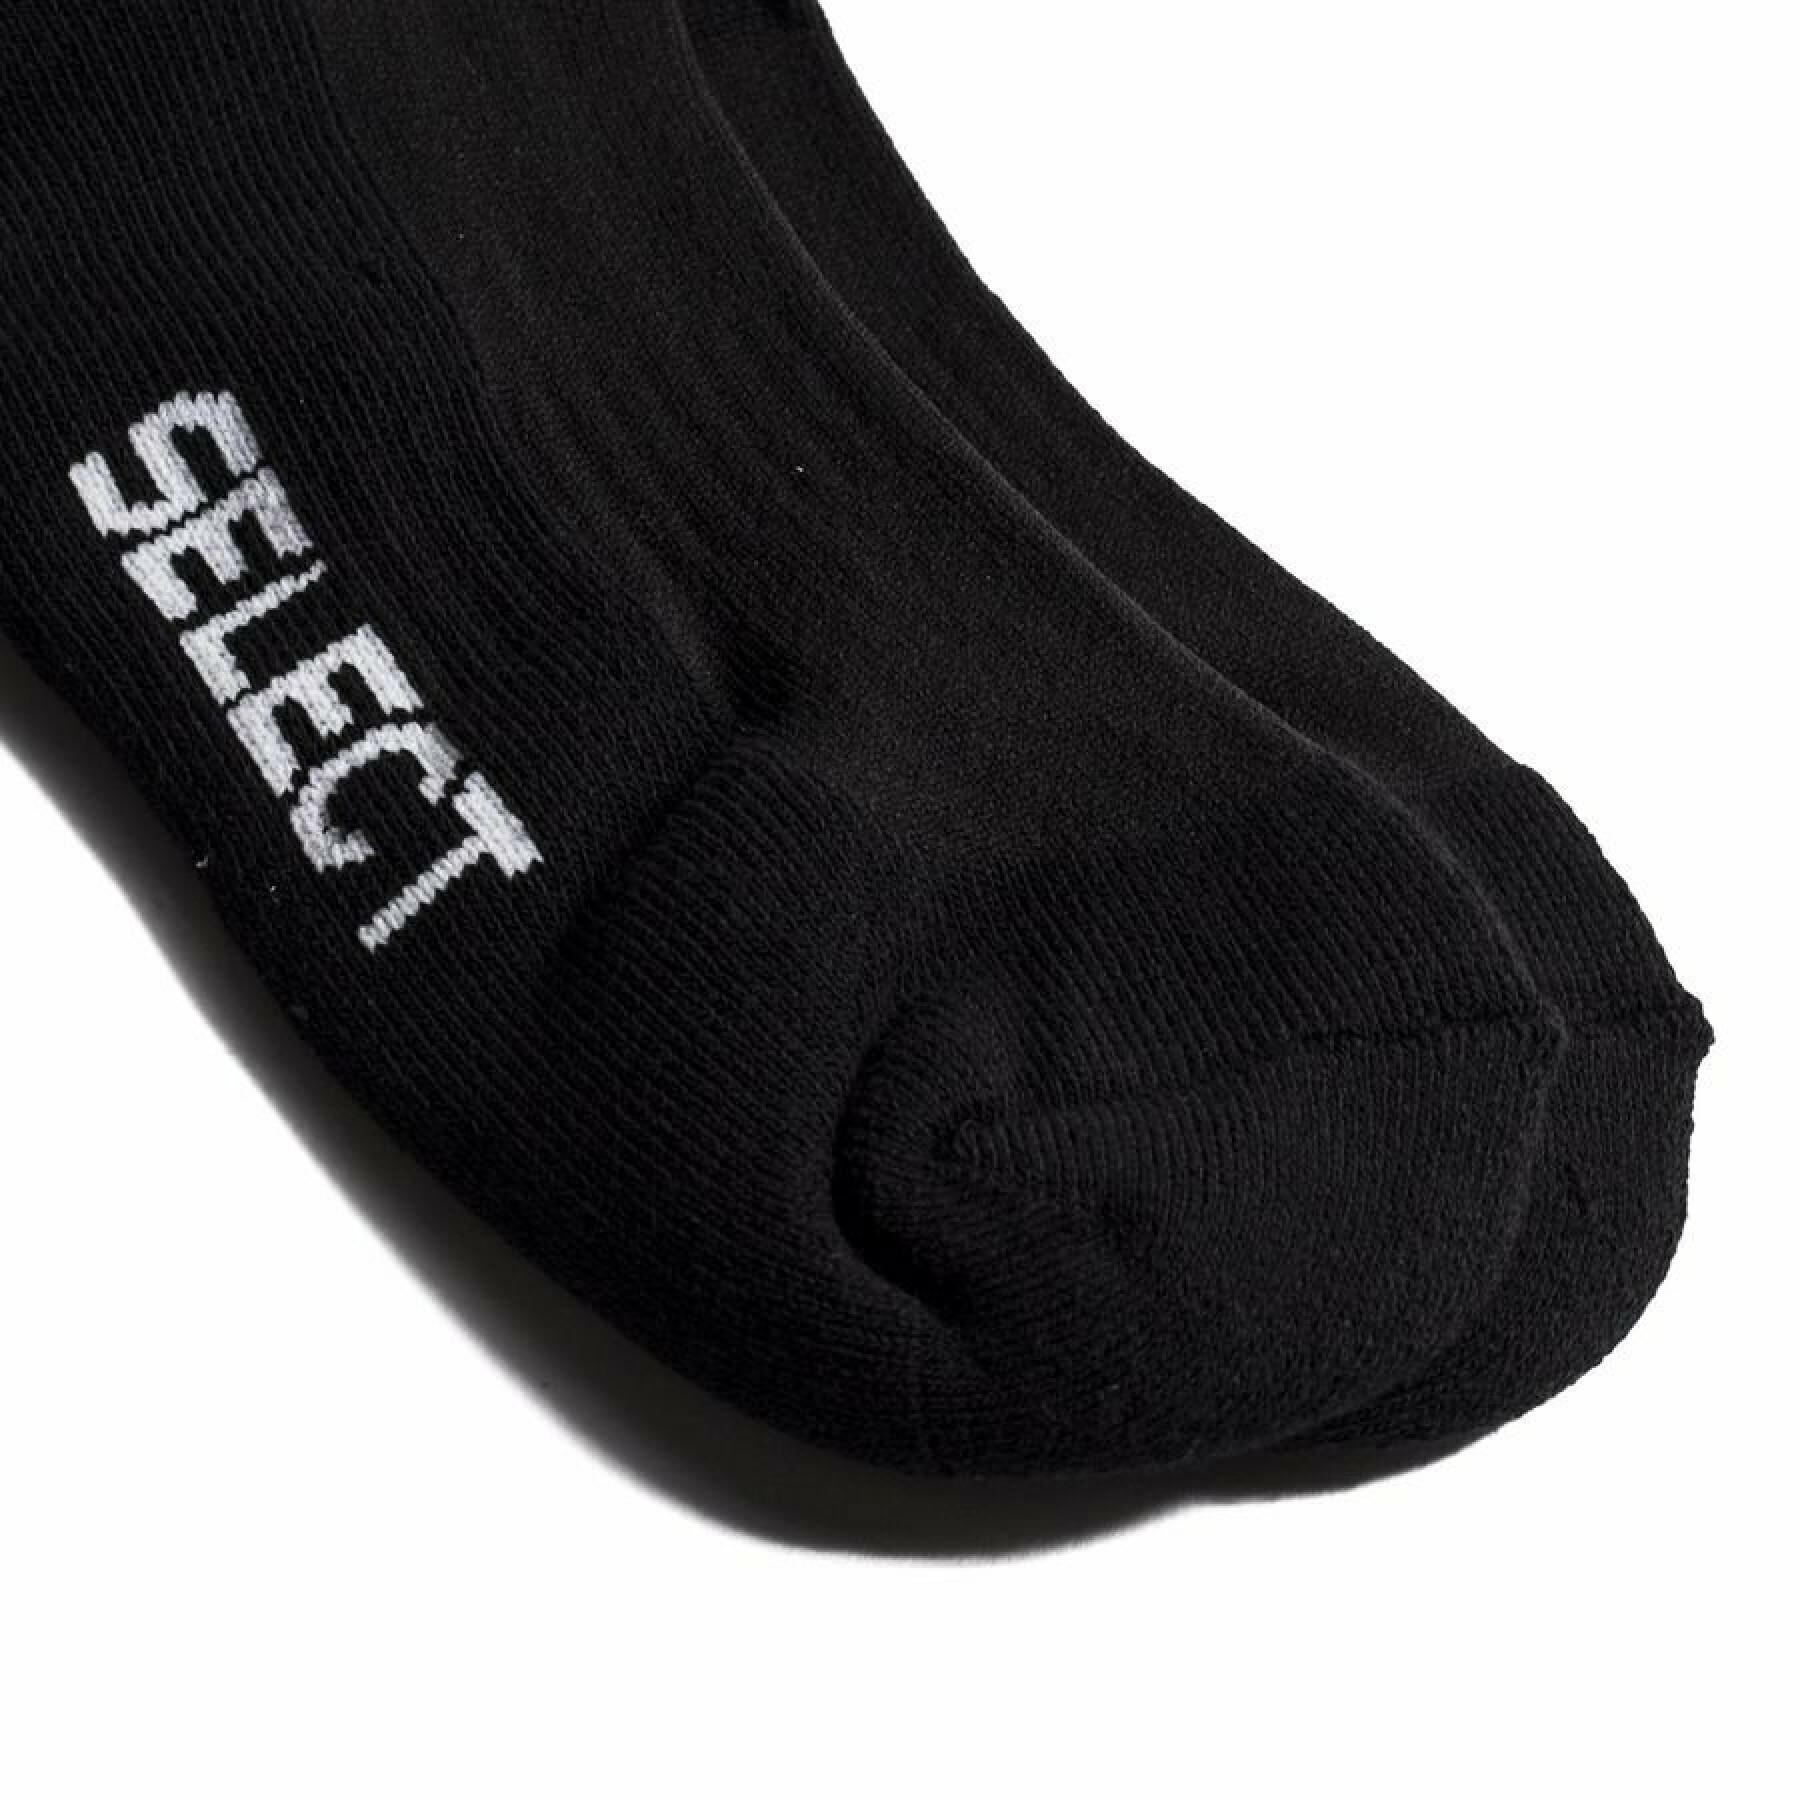 Chaussettes Select Sports Striped